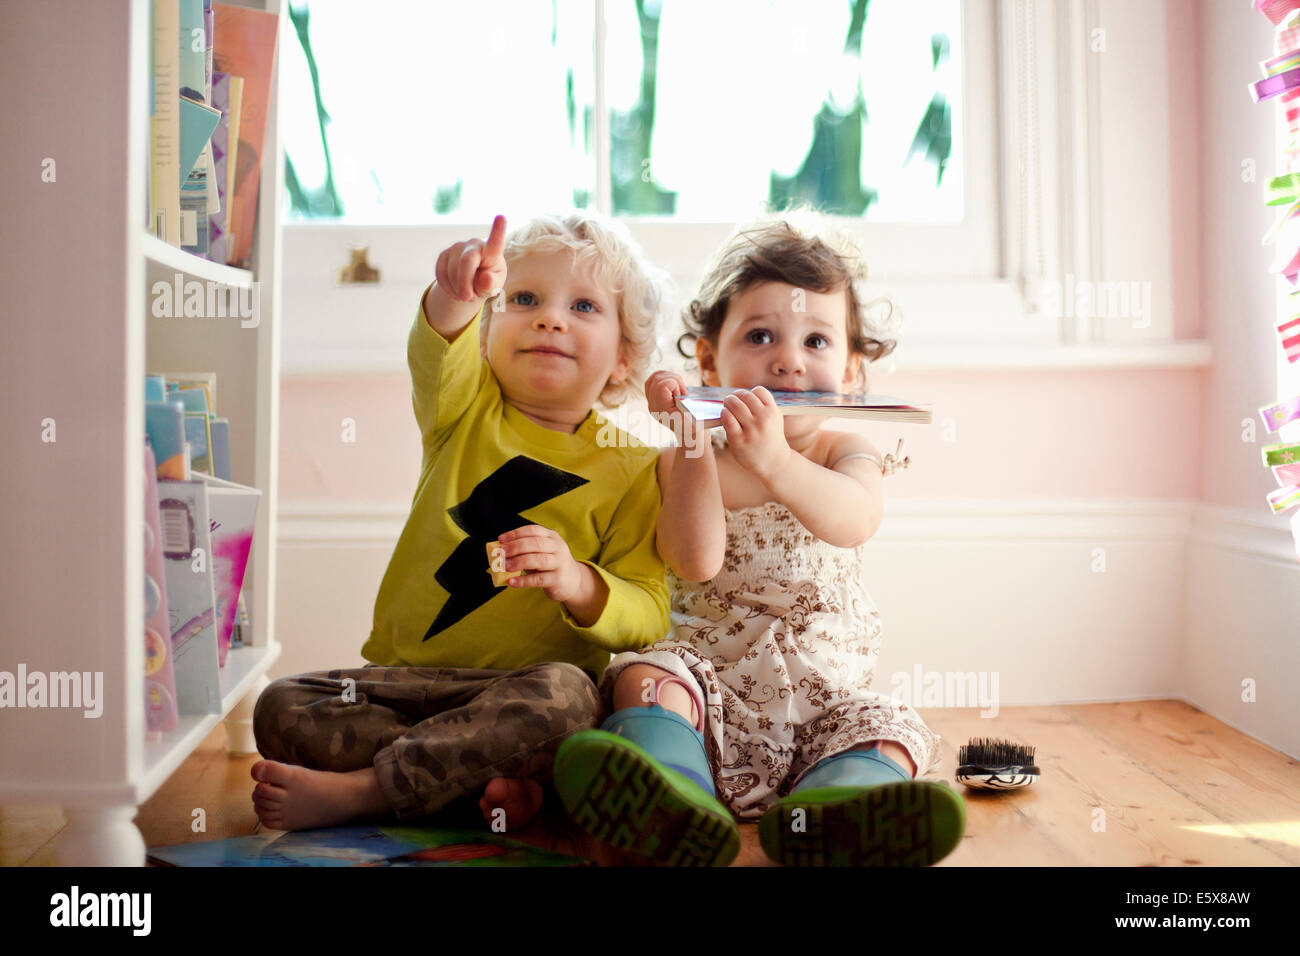 Female and male toddler friends pointing and looking up Stock Photo